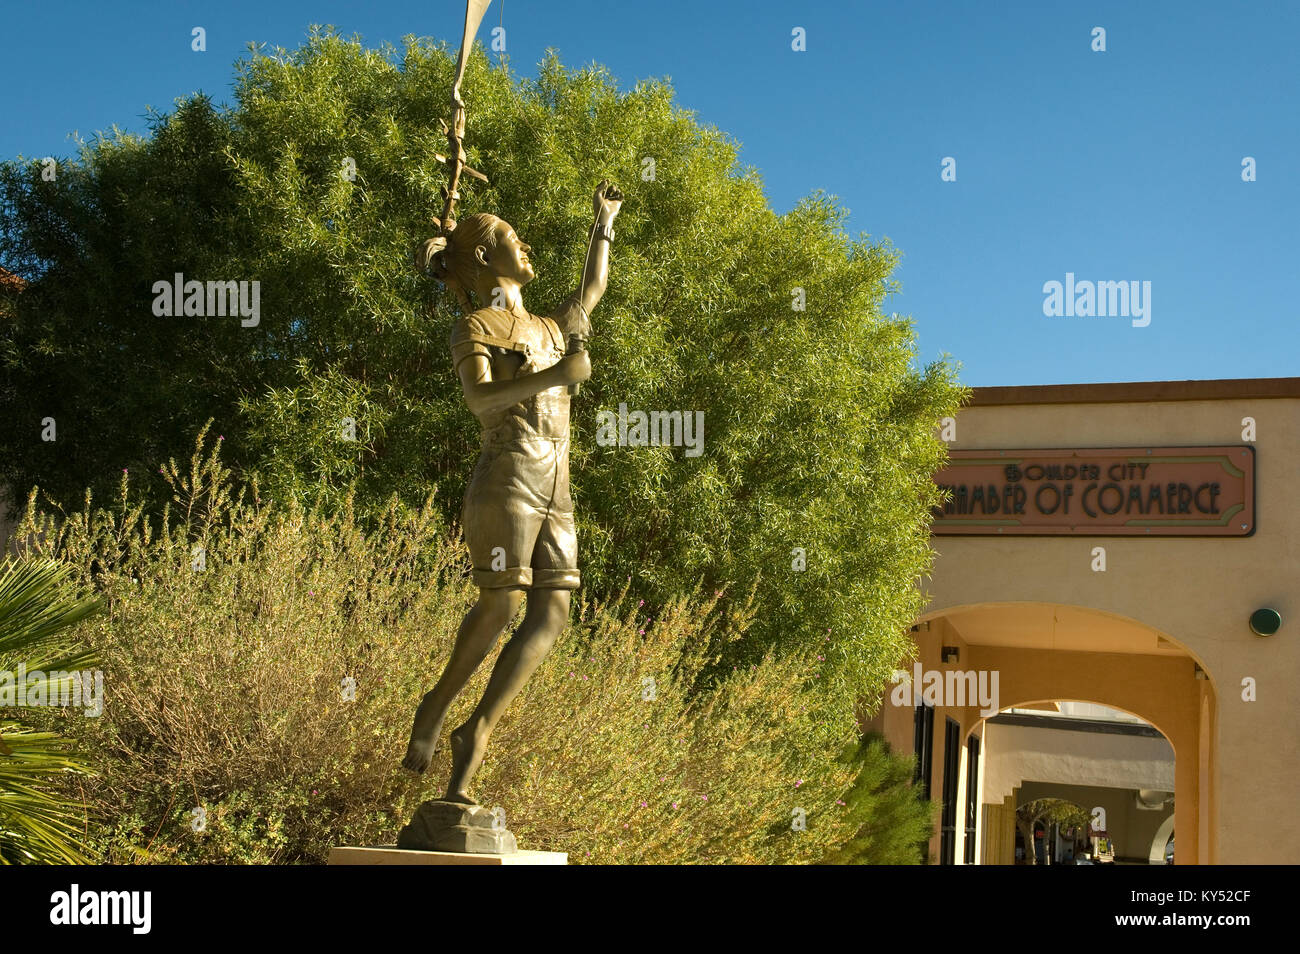 Boulder City Chamber of Commerce with Catching the Wind sculpture by Gregory Johnson at Boulder City, Nevada, USA. Stock Photo